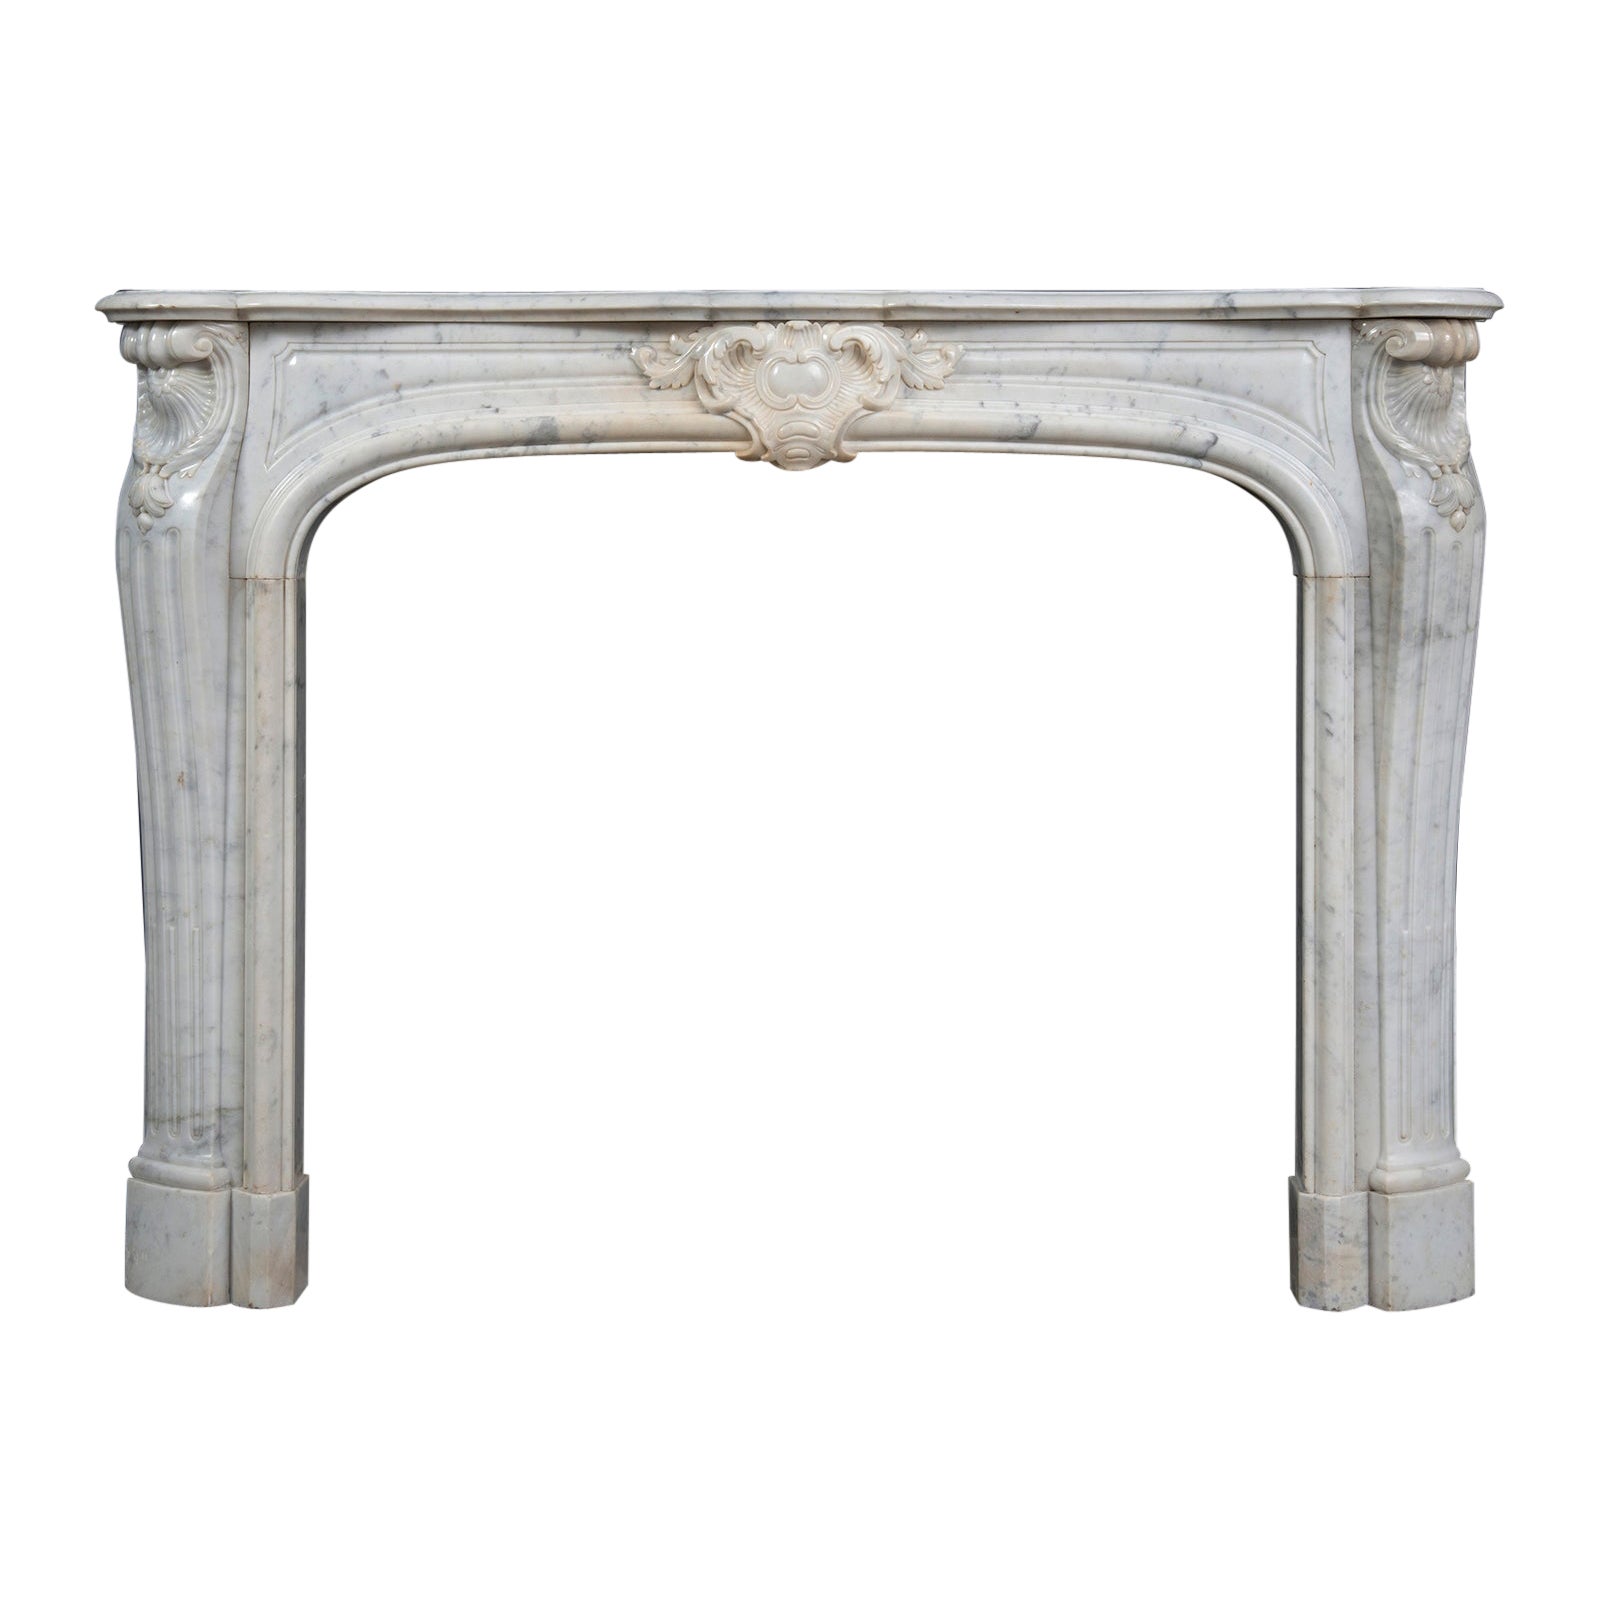 Beautiful French Louis XV Fireplace in White Marble, Paris- France